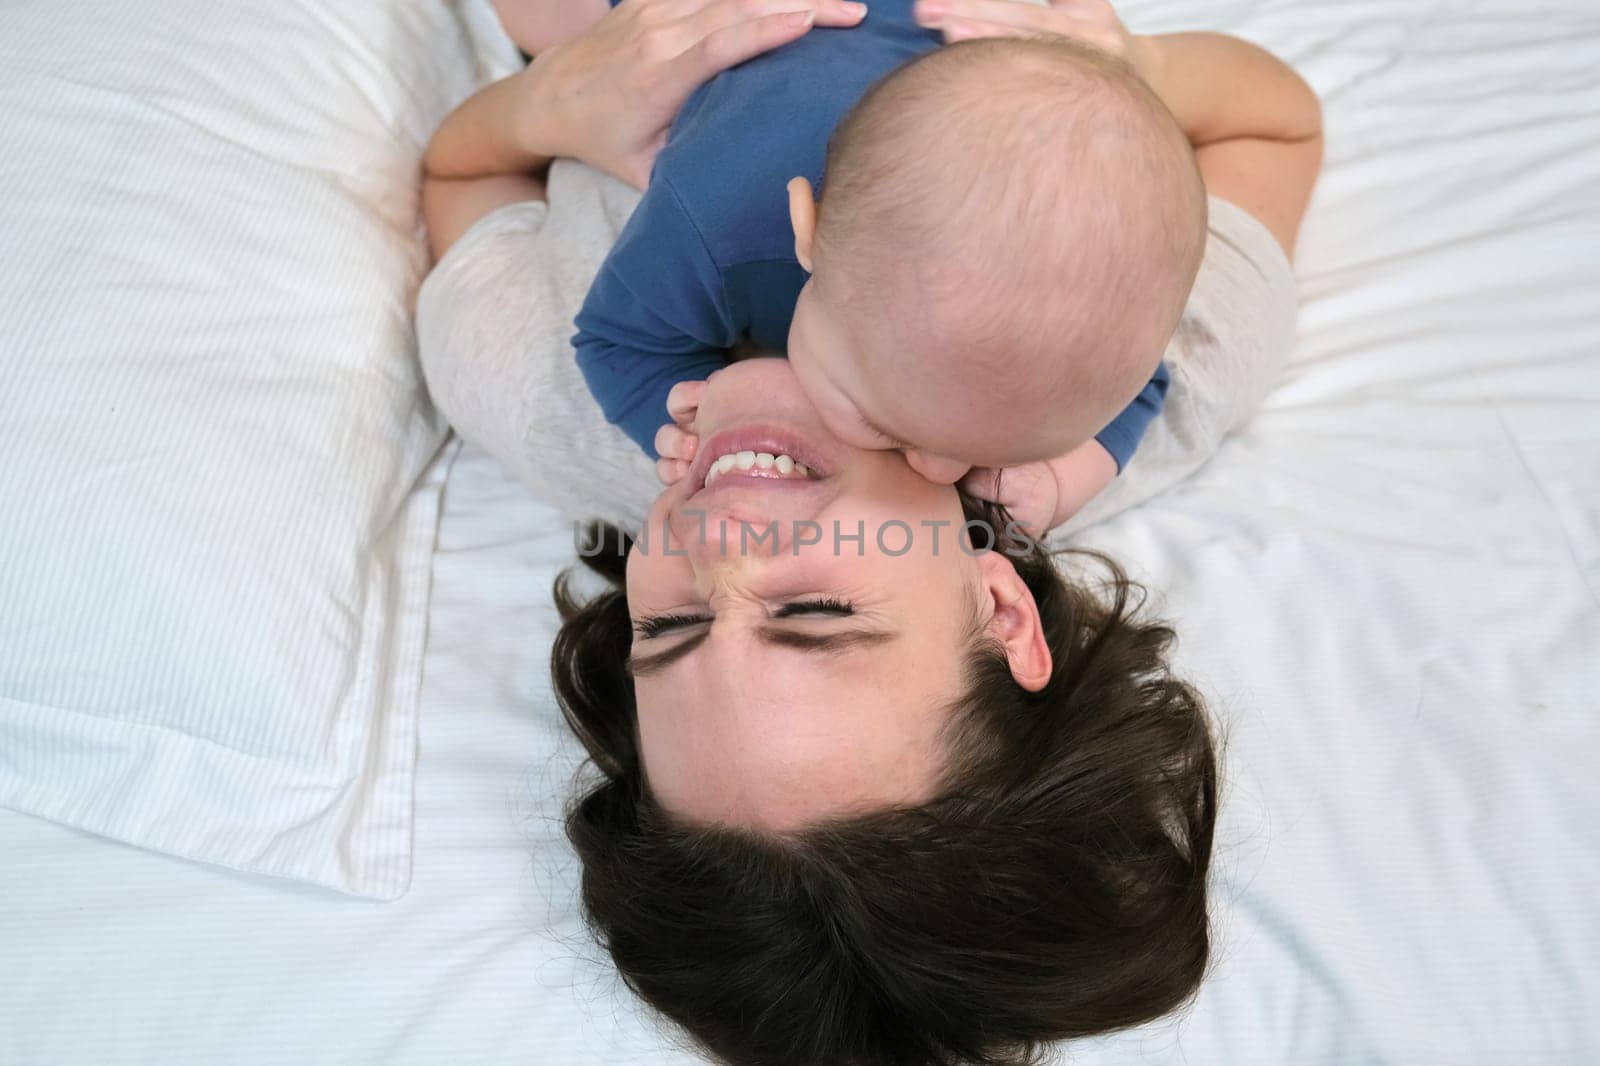 Young mother playing with toddler son, smiling woman holding baby in arms, parent and baby together at home lying in bed, view from above